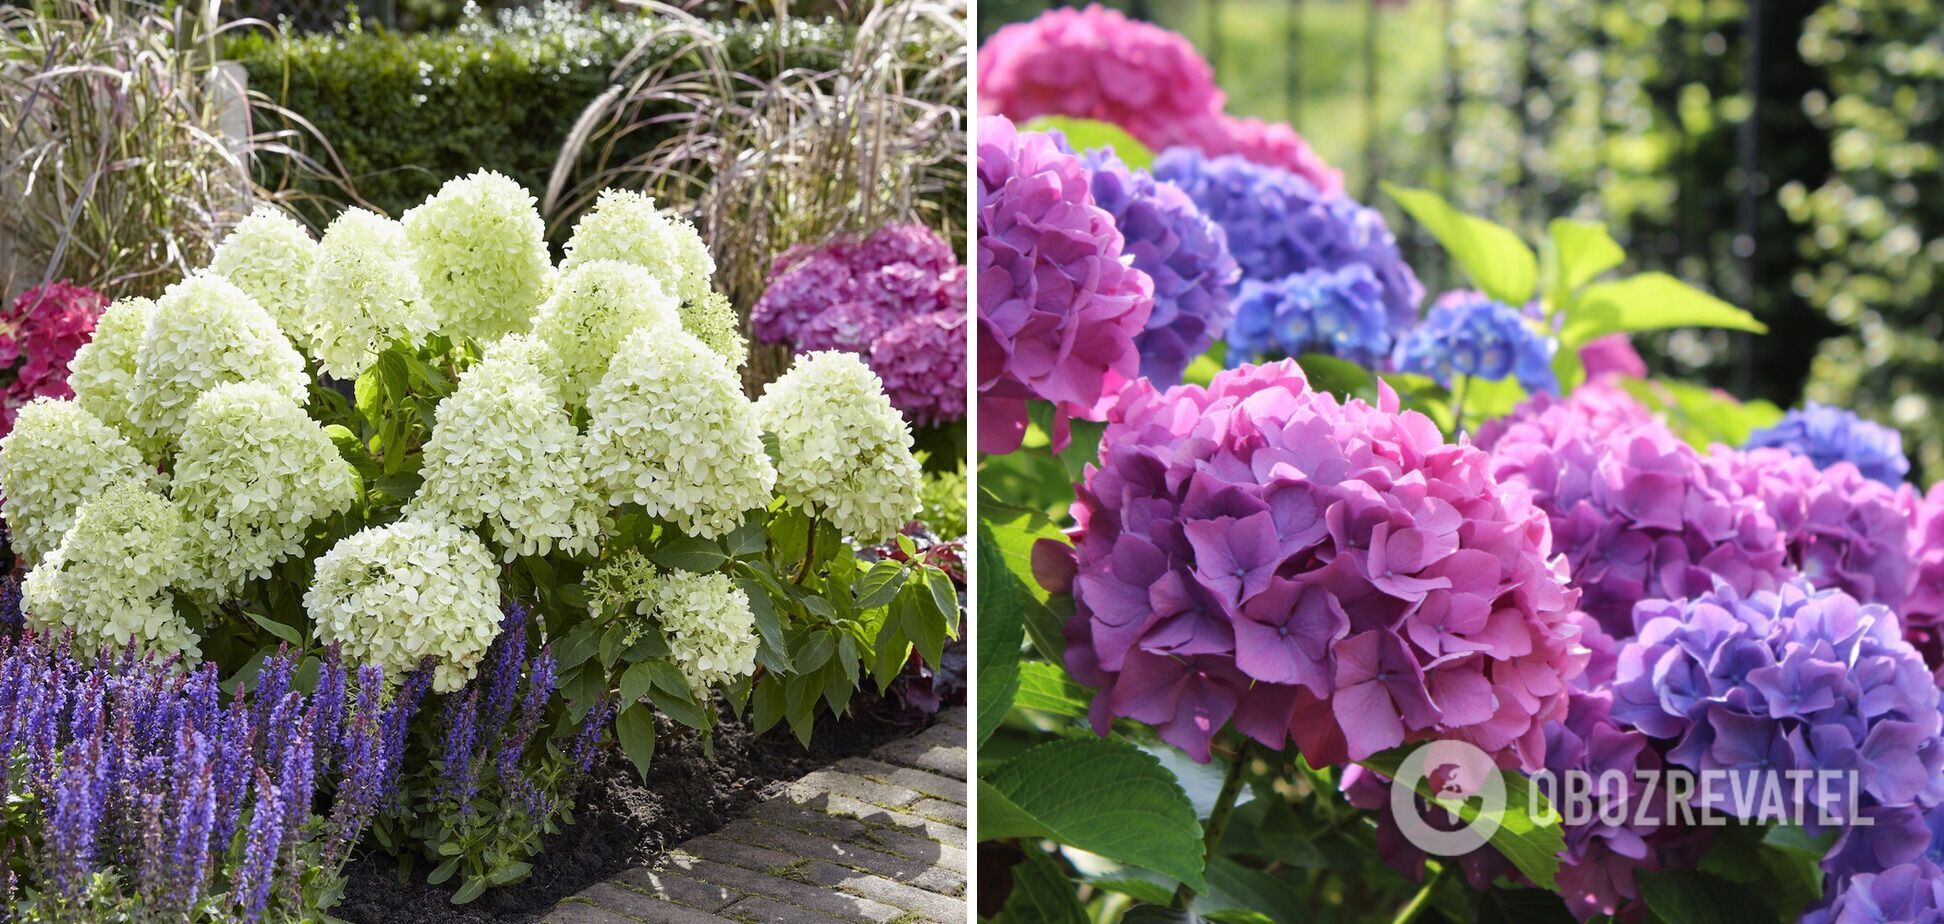 Which plants should not be cut back in summer: you'll only make things worse